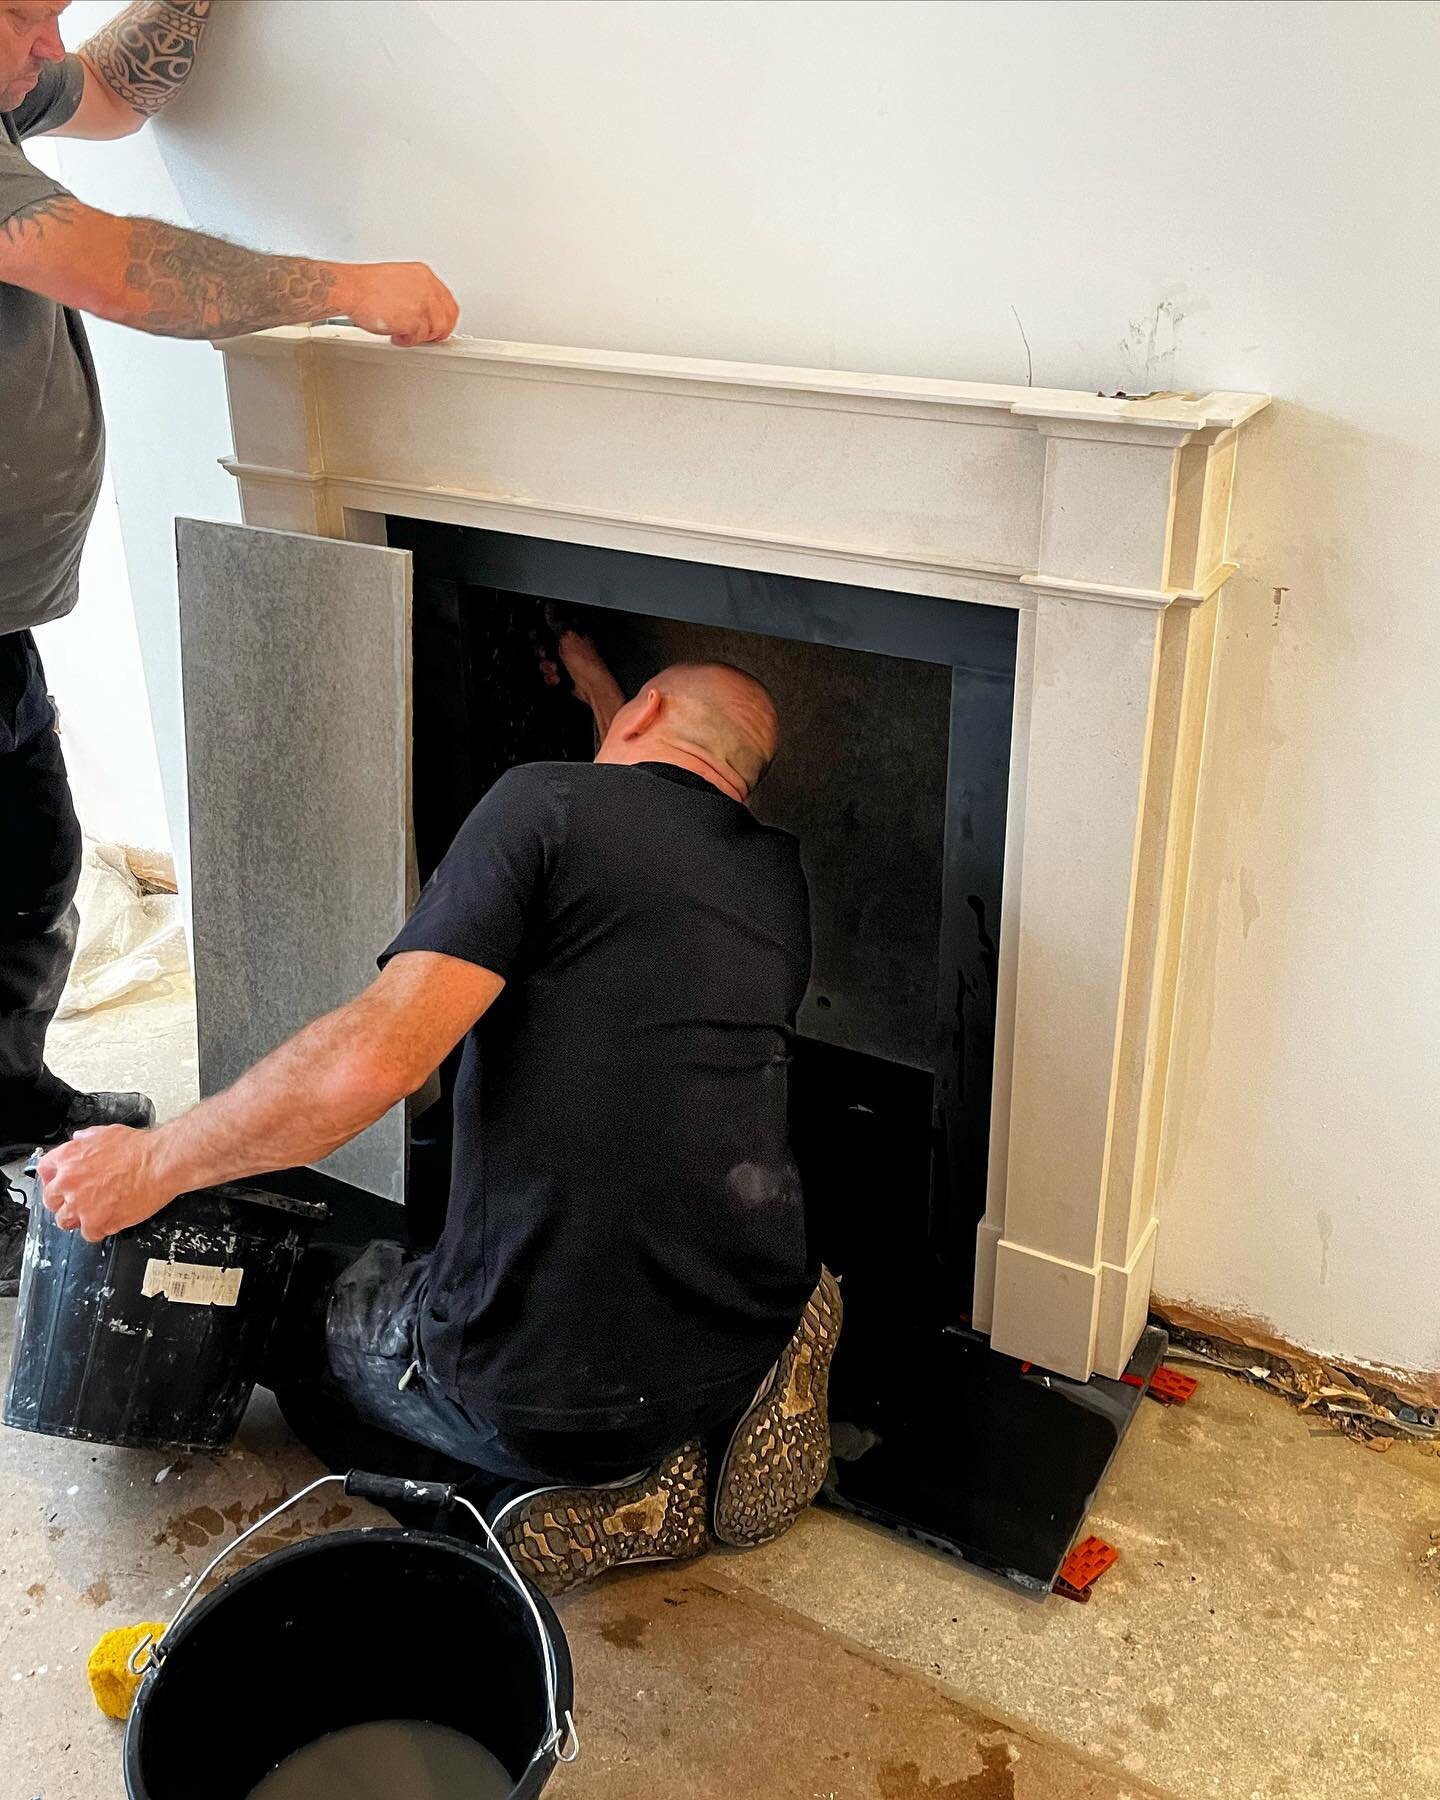 Chesney&rsquo;s fireplace being installed to our Richmond project. #fireplace #bigbeanconstruction #interiordesign #design #fire #architecture #beautiful #stone #london